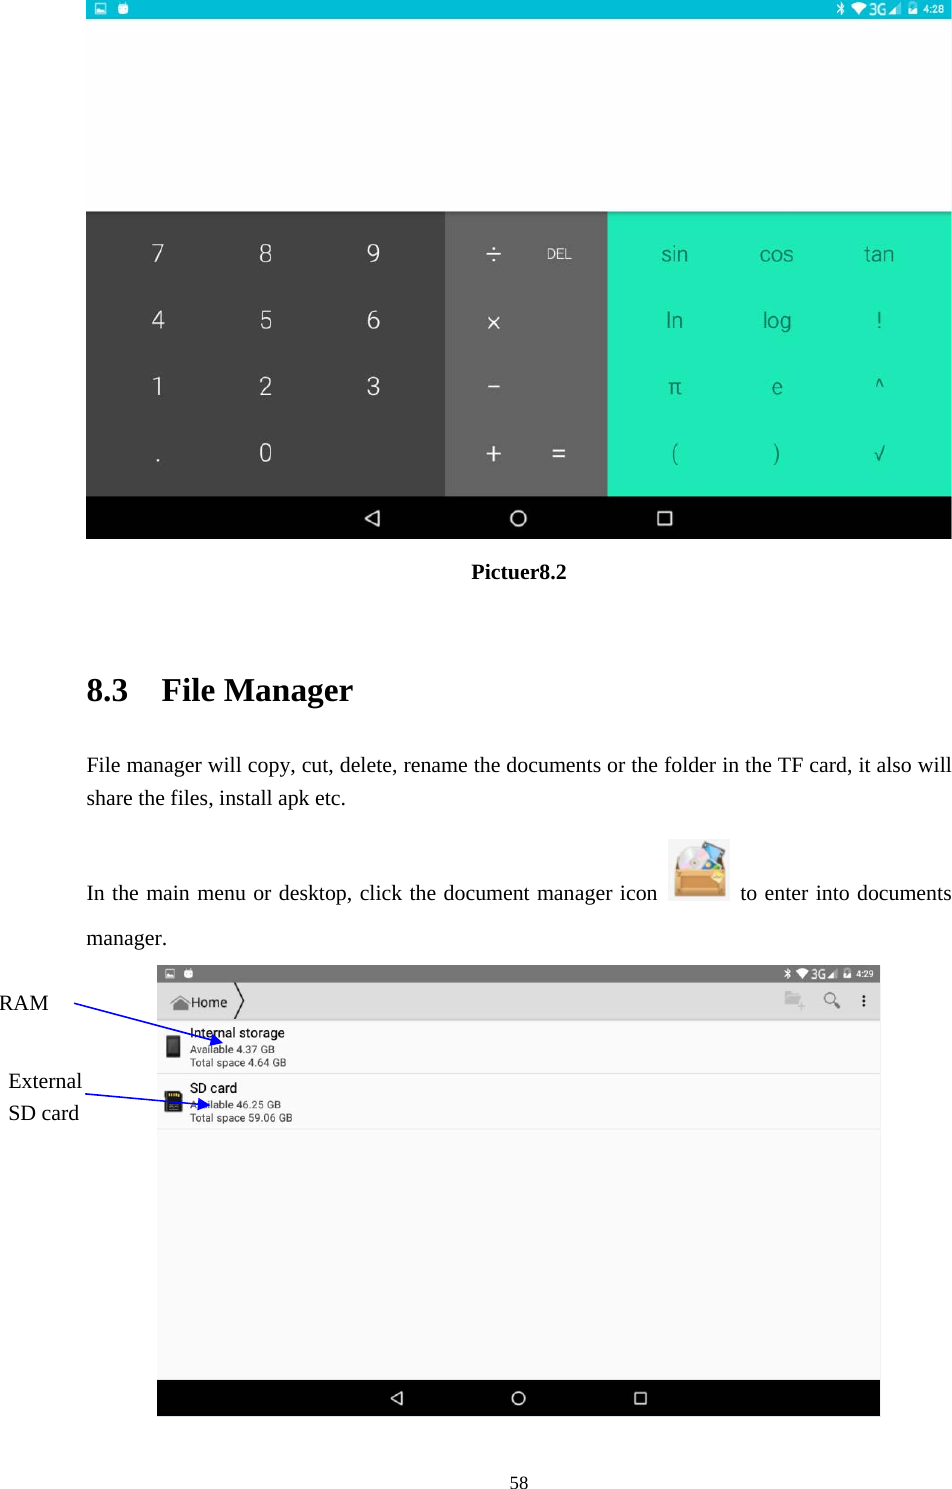     58 Pictuer8.2  8.3  File Manager File manager will copy, cut, delete, rename the documents or the folder in the TF card, it also will share the files, install apk etc. In the main menu or desktop, click the document manager icon    to enter into documents manager.  RAM External SD card 